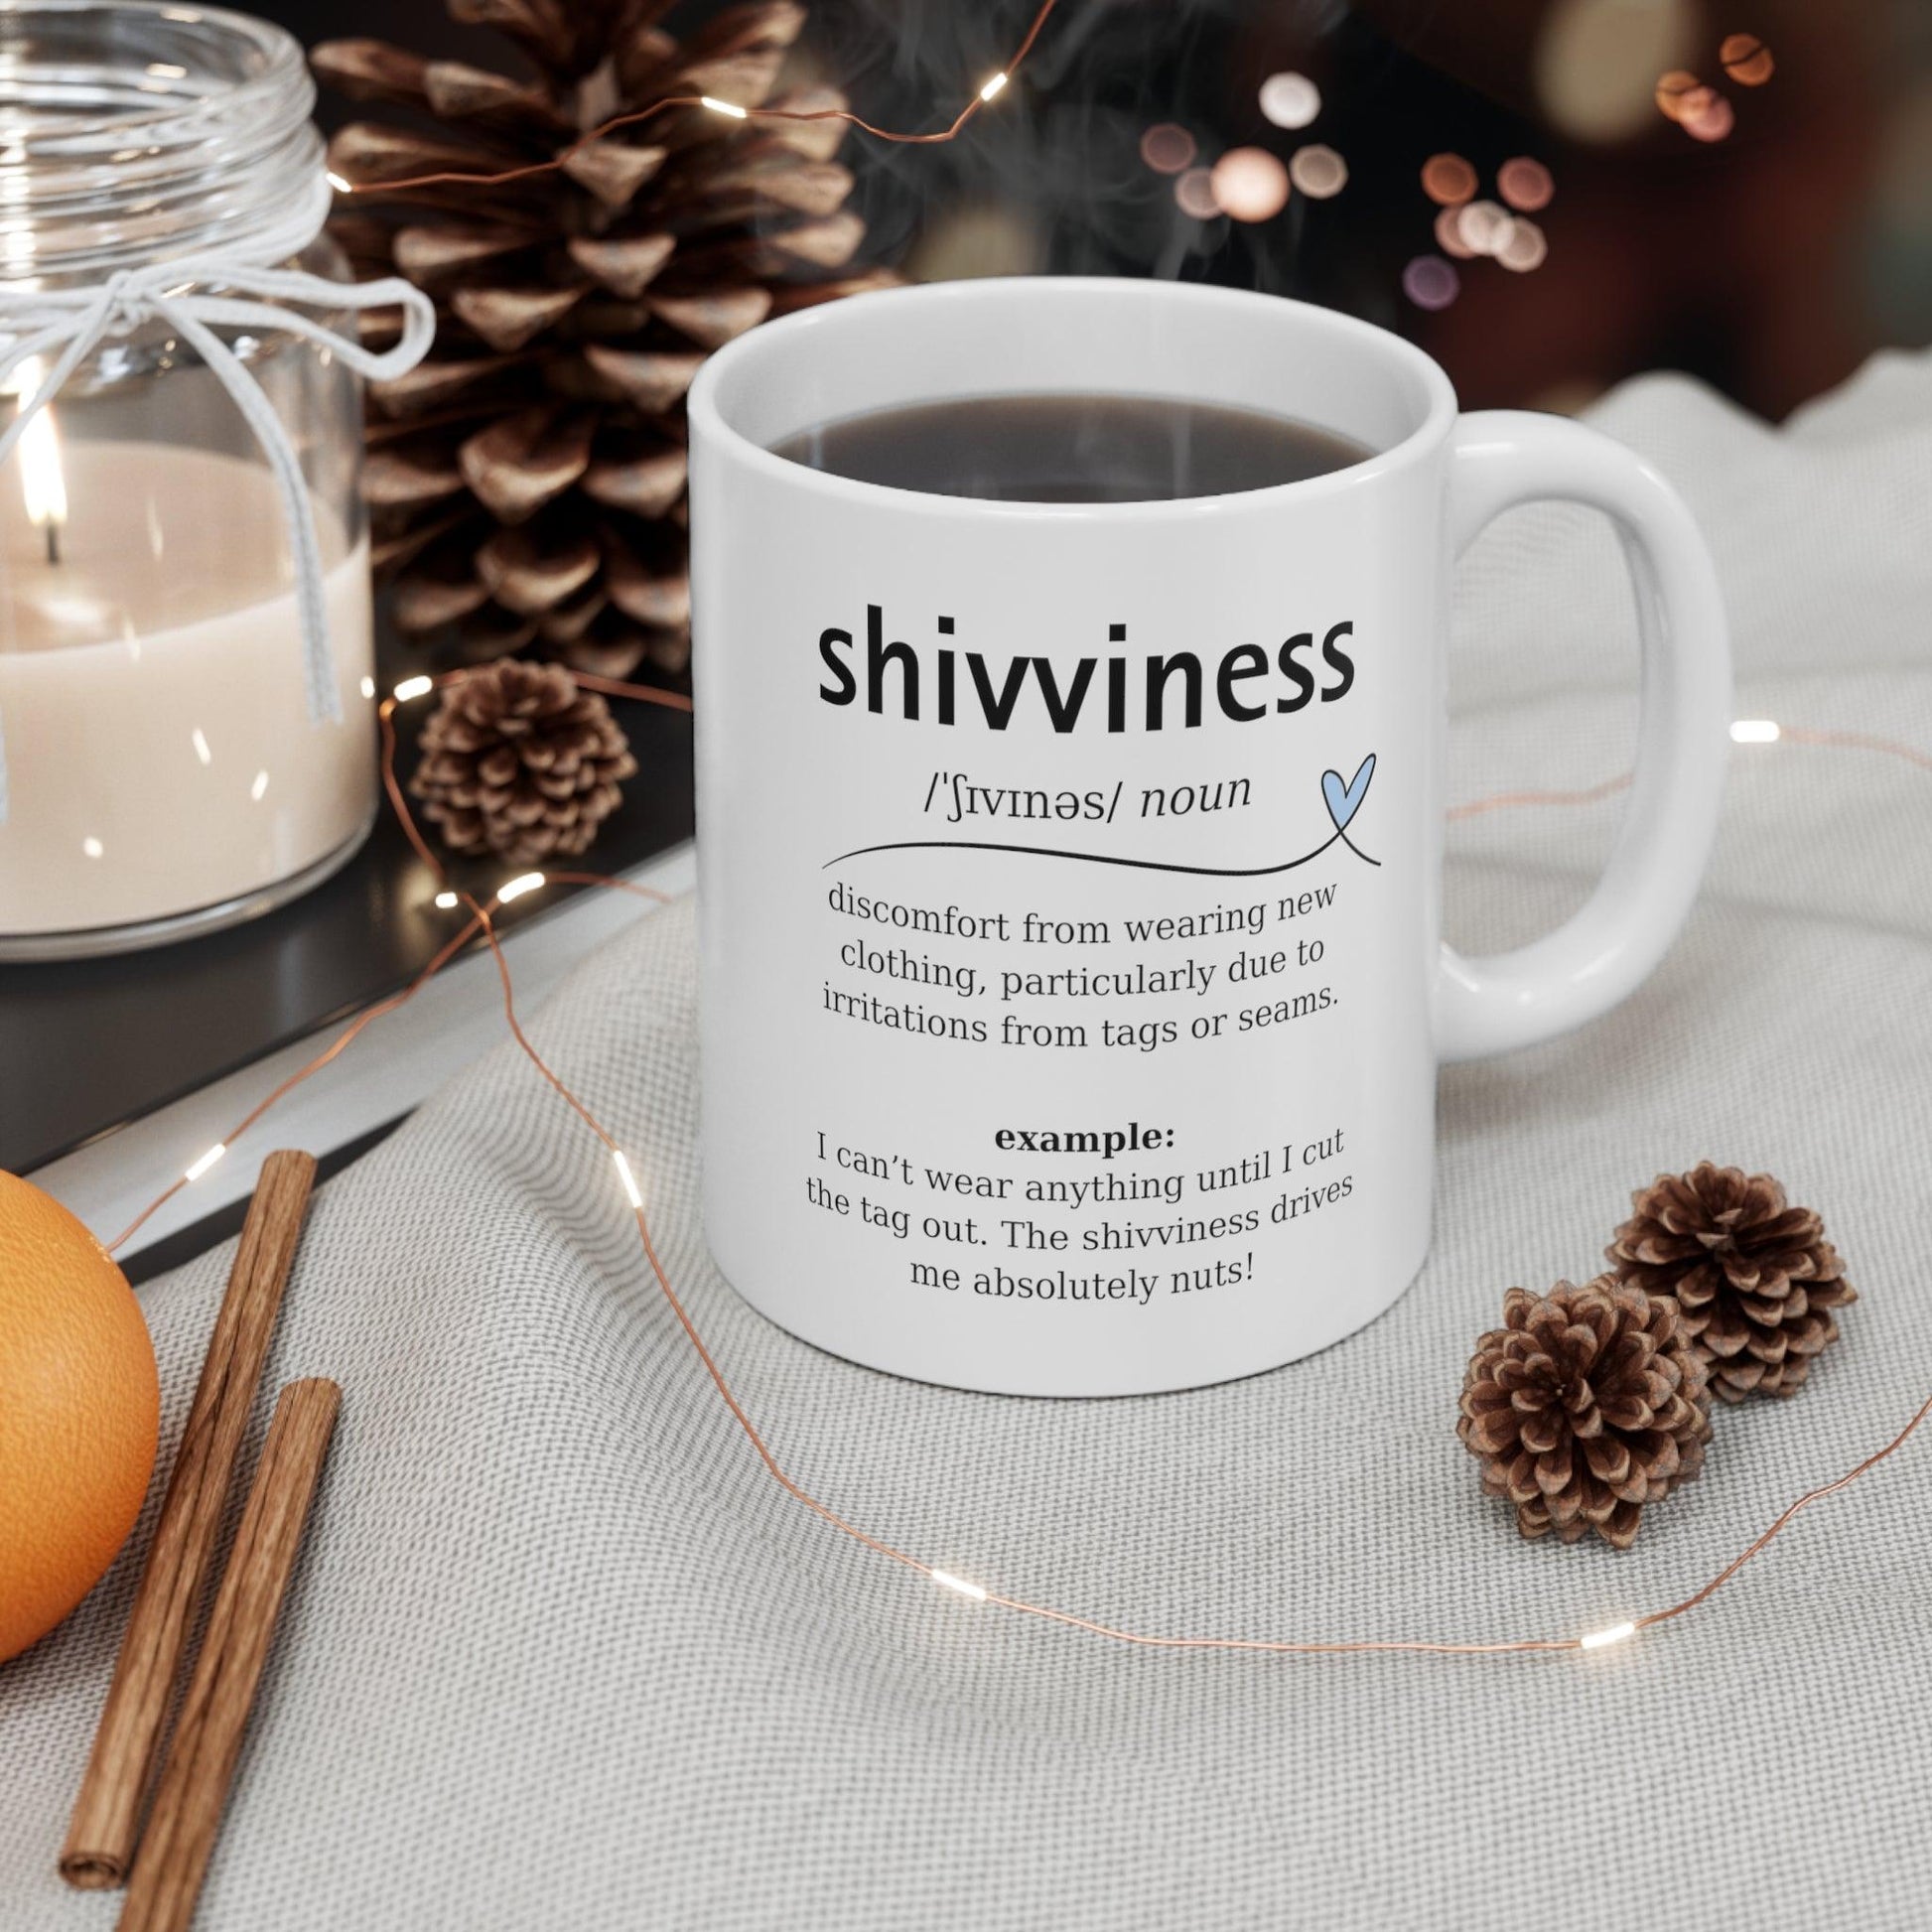 Shivviness Meaning: ADHD Dictionary Definition Mug - Fidget and Focus